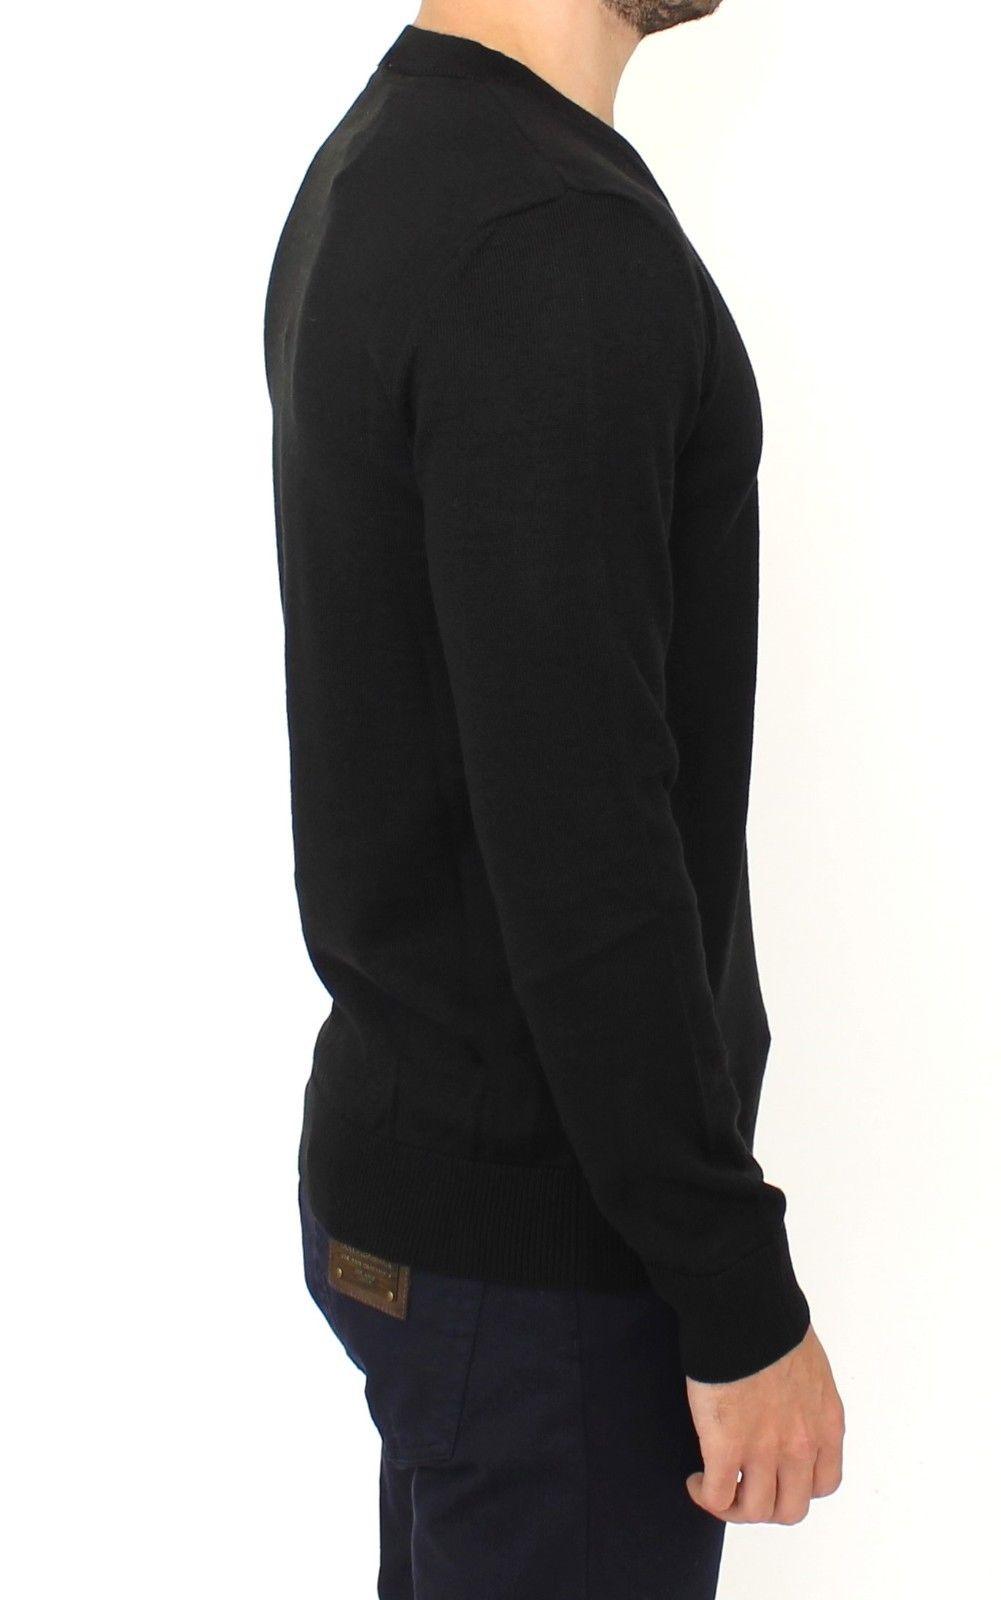 Black Wool Blend V-neck Pullover Sweater - Designed by Ermanno Scervino Available to Buy at a Discounted Price on Moon Behind The Hill Online Designer Discount Store